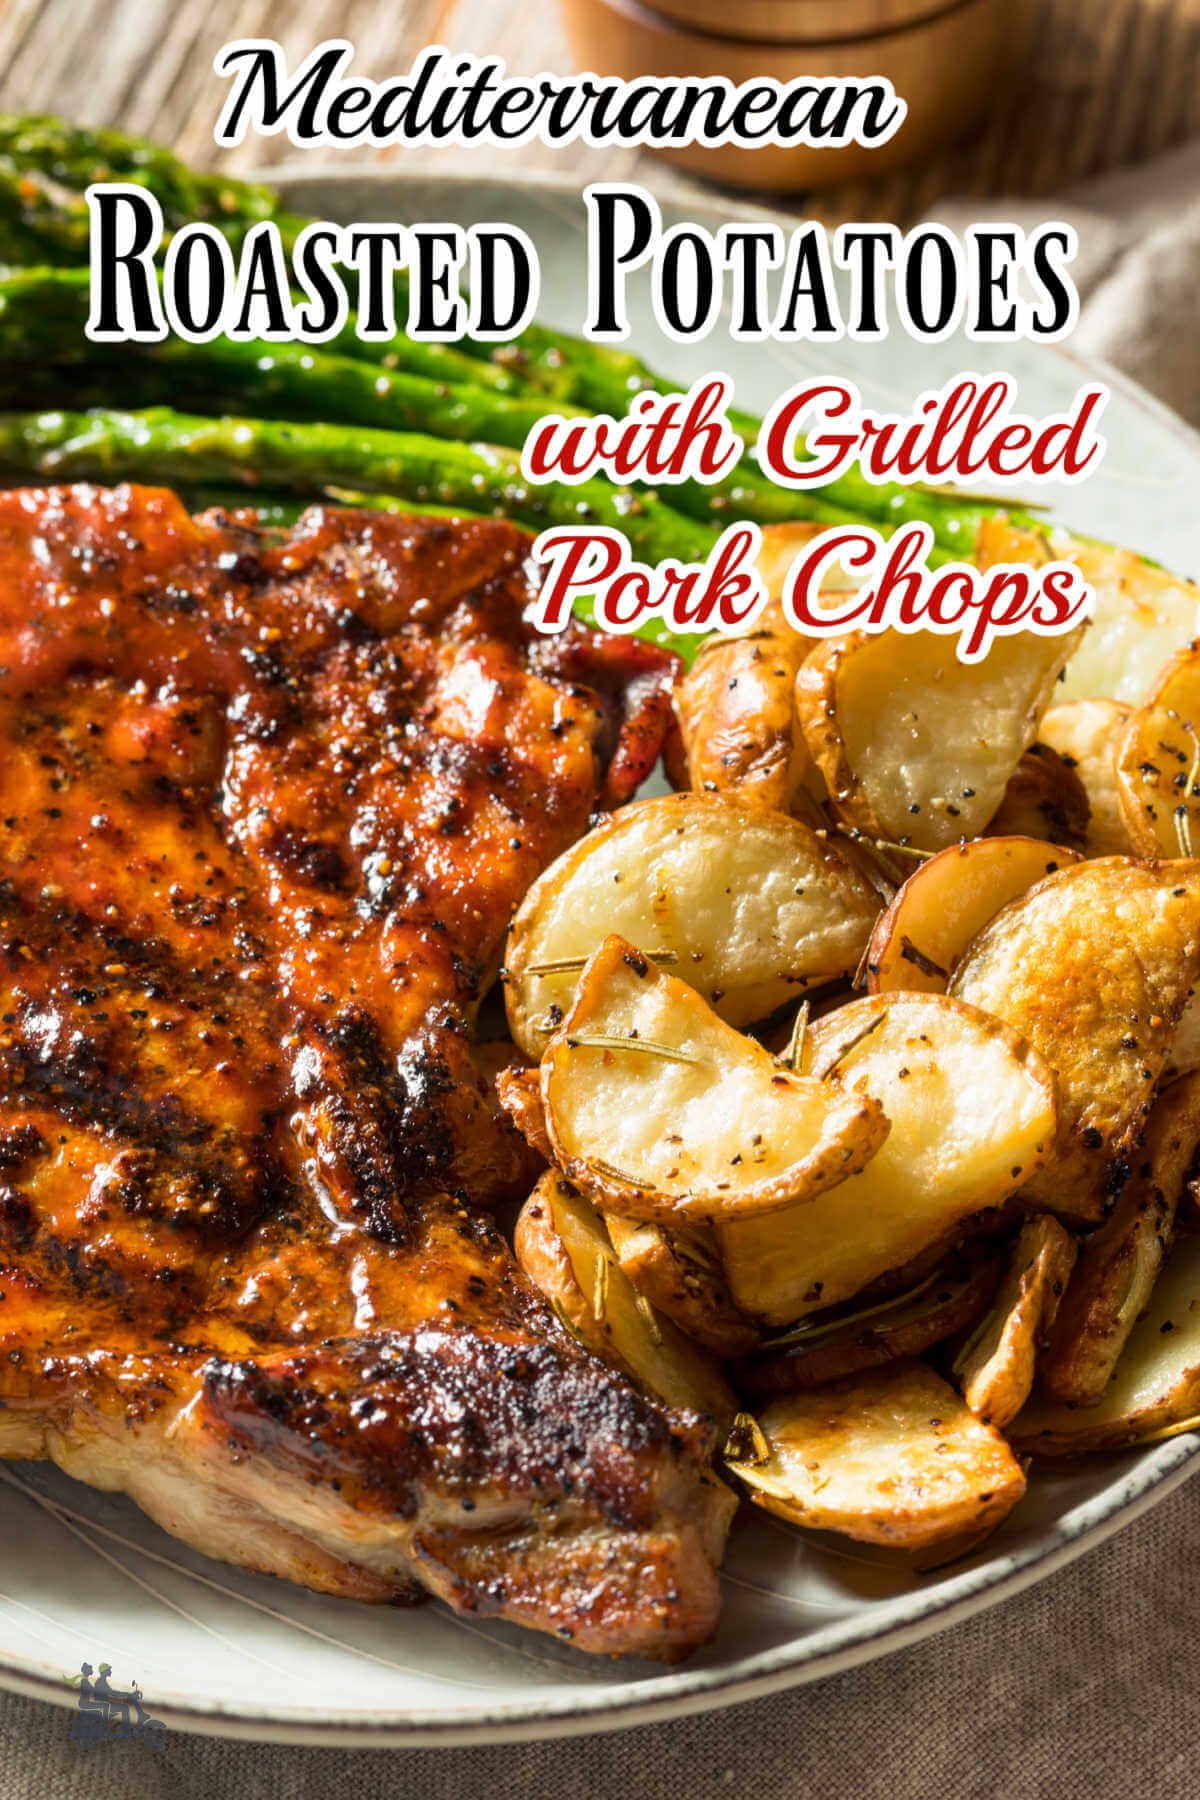 Pinterest image with text overlay of Mediterranean Potatoes with Pork Chops.